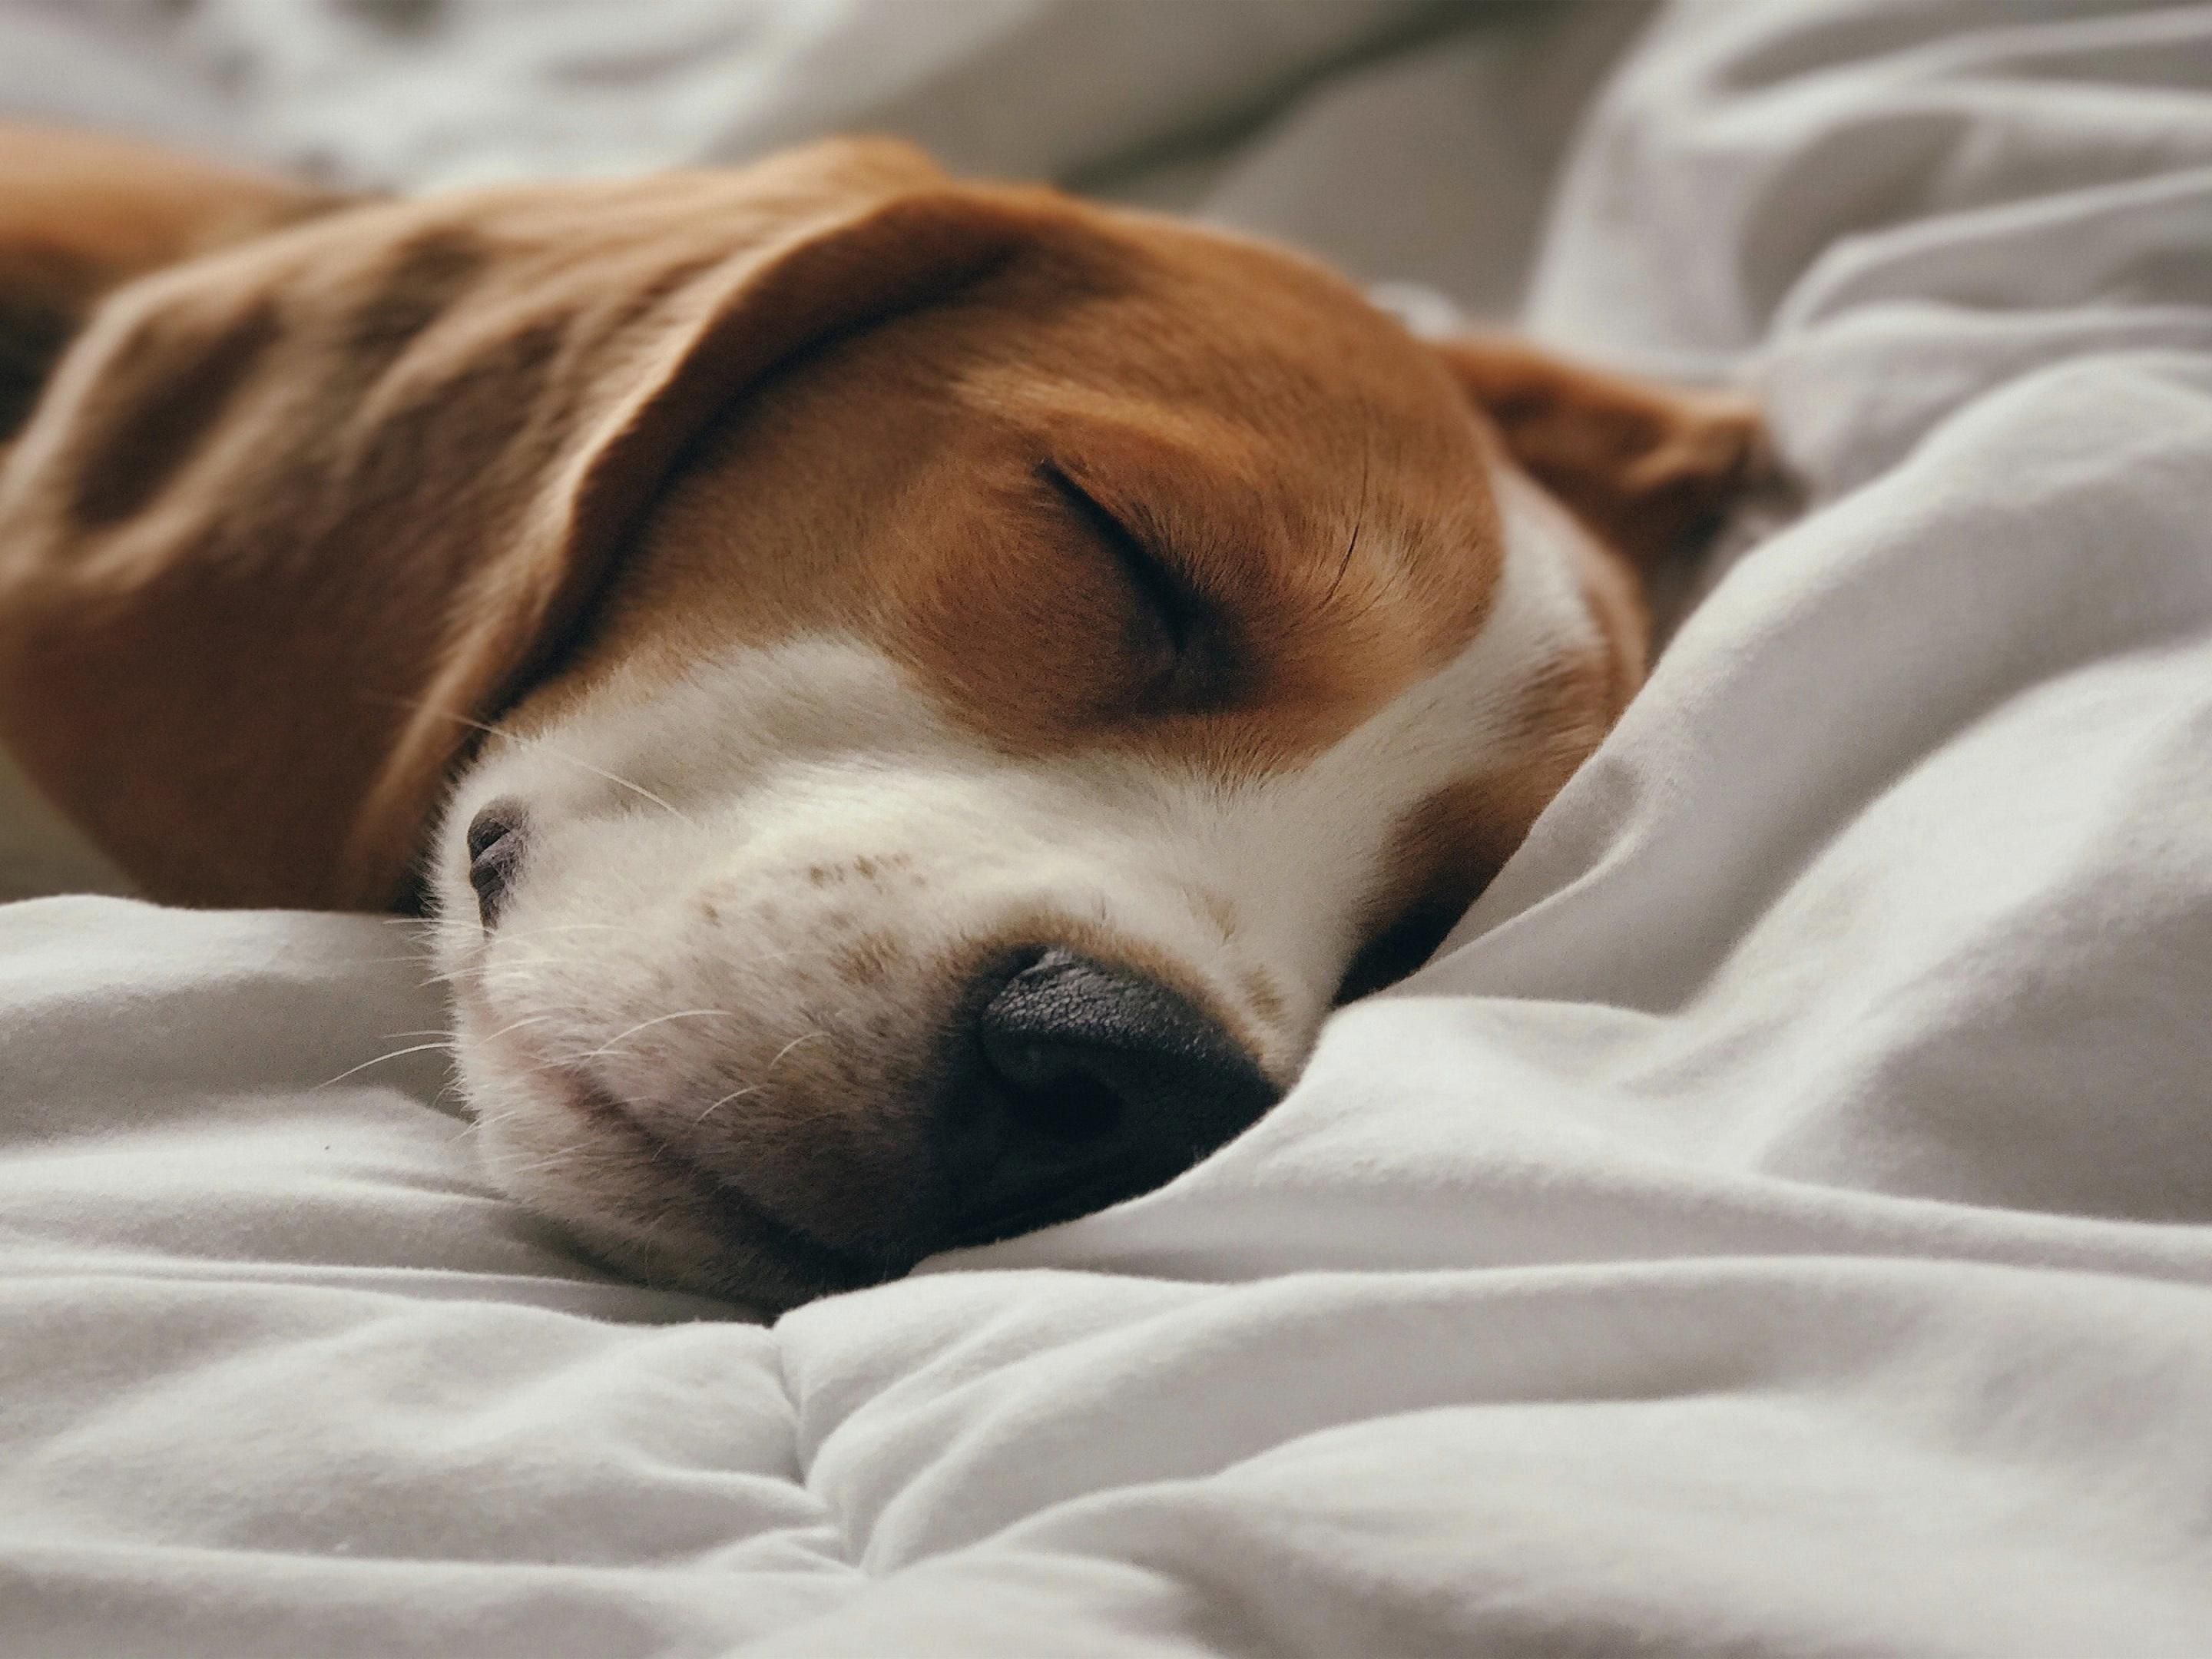 The Holiday Inn and Suites Cincinnati Eastgate is pet friendly. We accept pets up to 60 pounds with an additional fee of USD 40 per stay, maximum of two animals per room. Pets must be supervised by owners at all times.